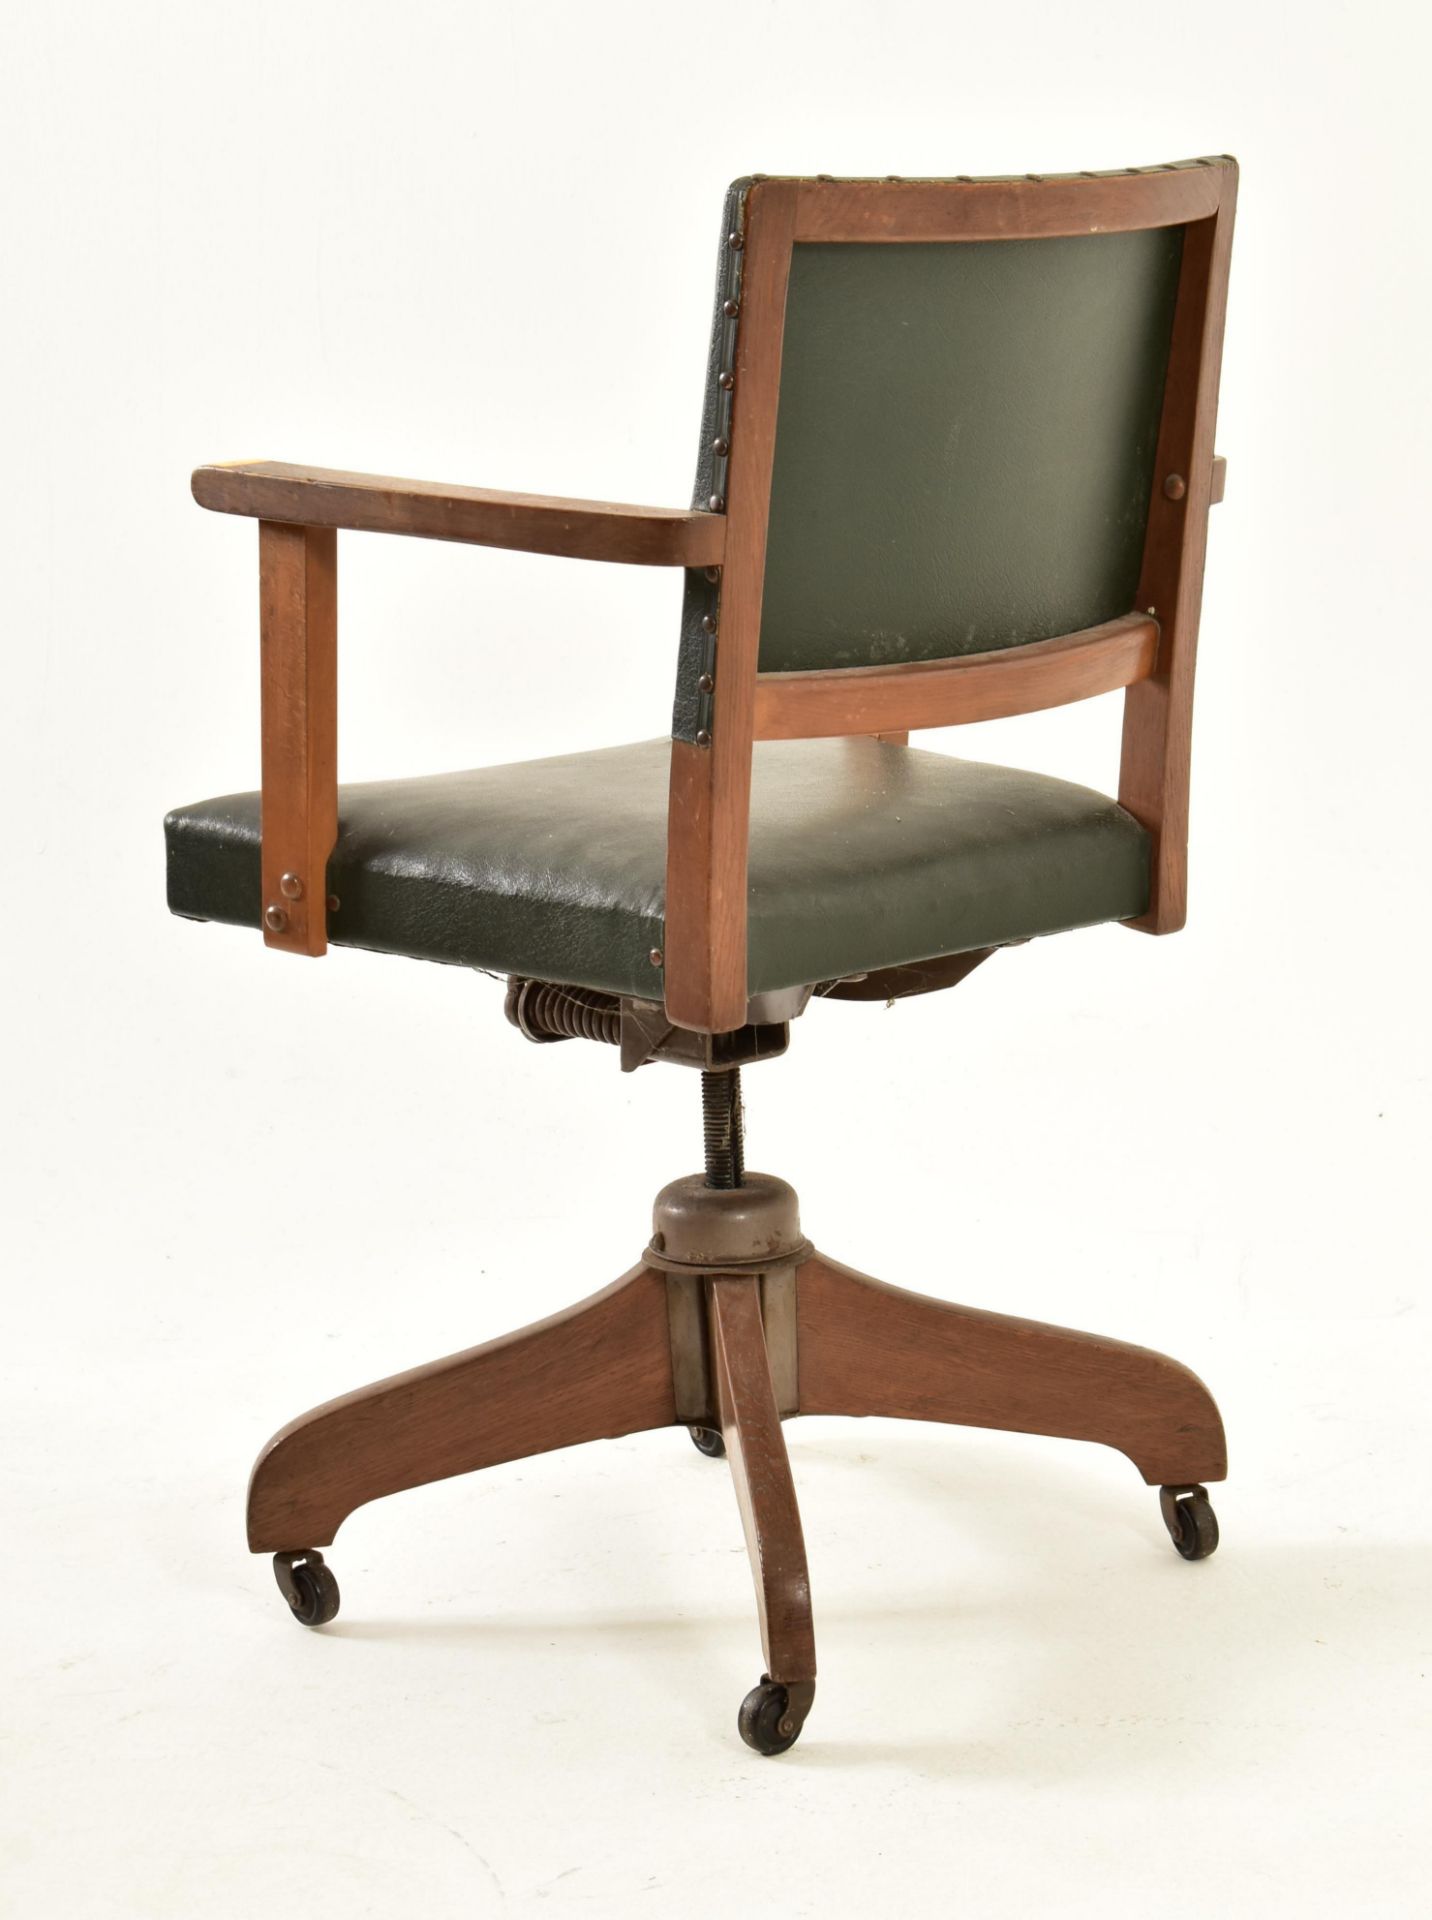 HILLCREST - 20TH CENTURY 1930S BEECH & LEATHER SWIVEL CHAIR - Image 7 of 7